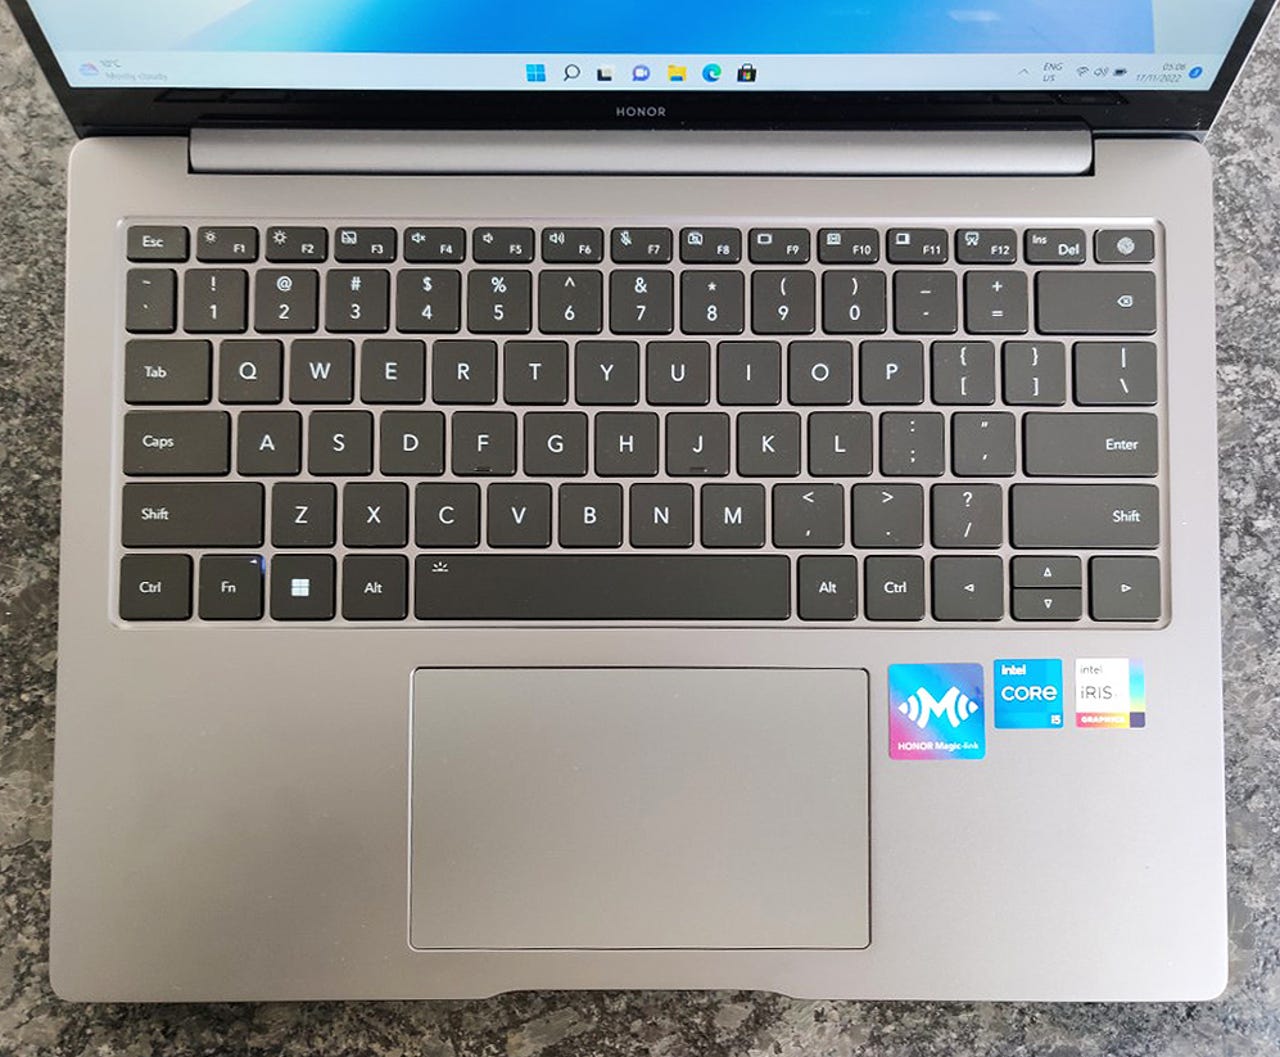 Honor MagicBook V 14 2022 launches as a new touchscreen laptop alongside  the MagicBook X 16 and 14 2022 in China -  News